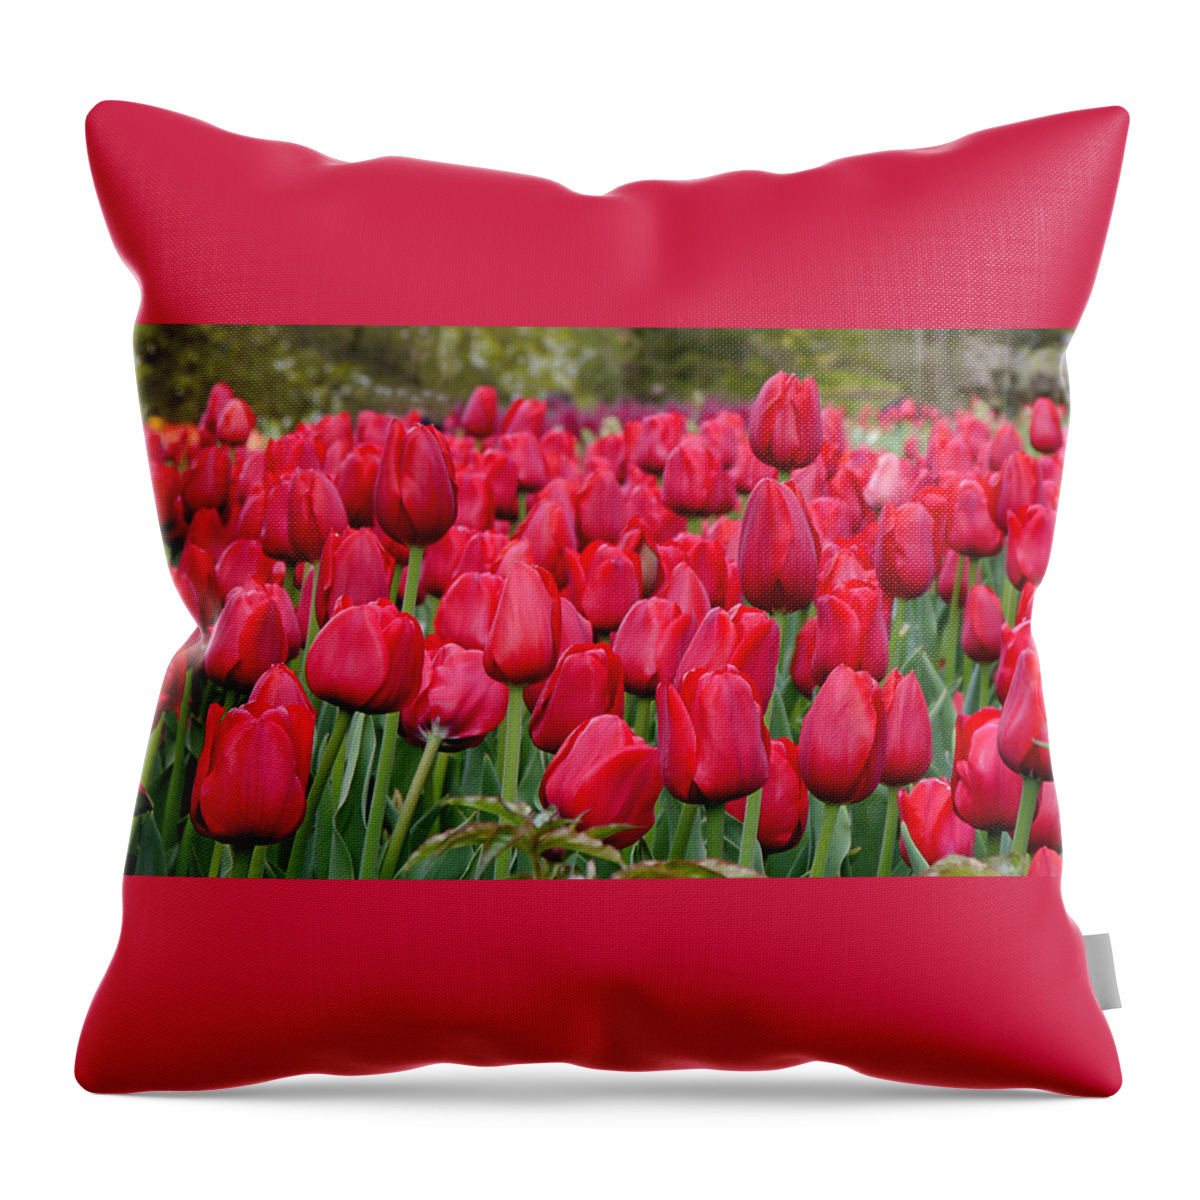 Tulip Throw Pillow featuring the photograph Crimson Tulips by Richard Reeve